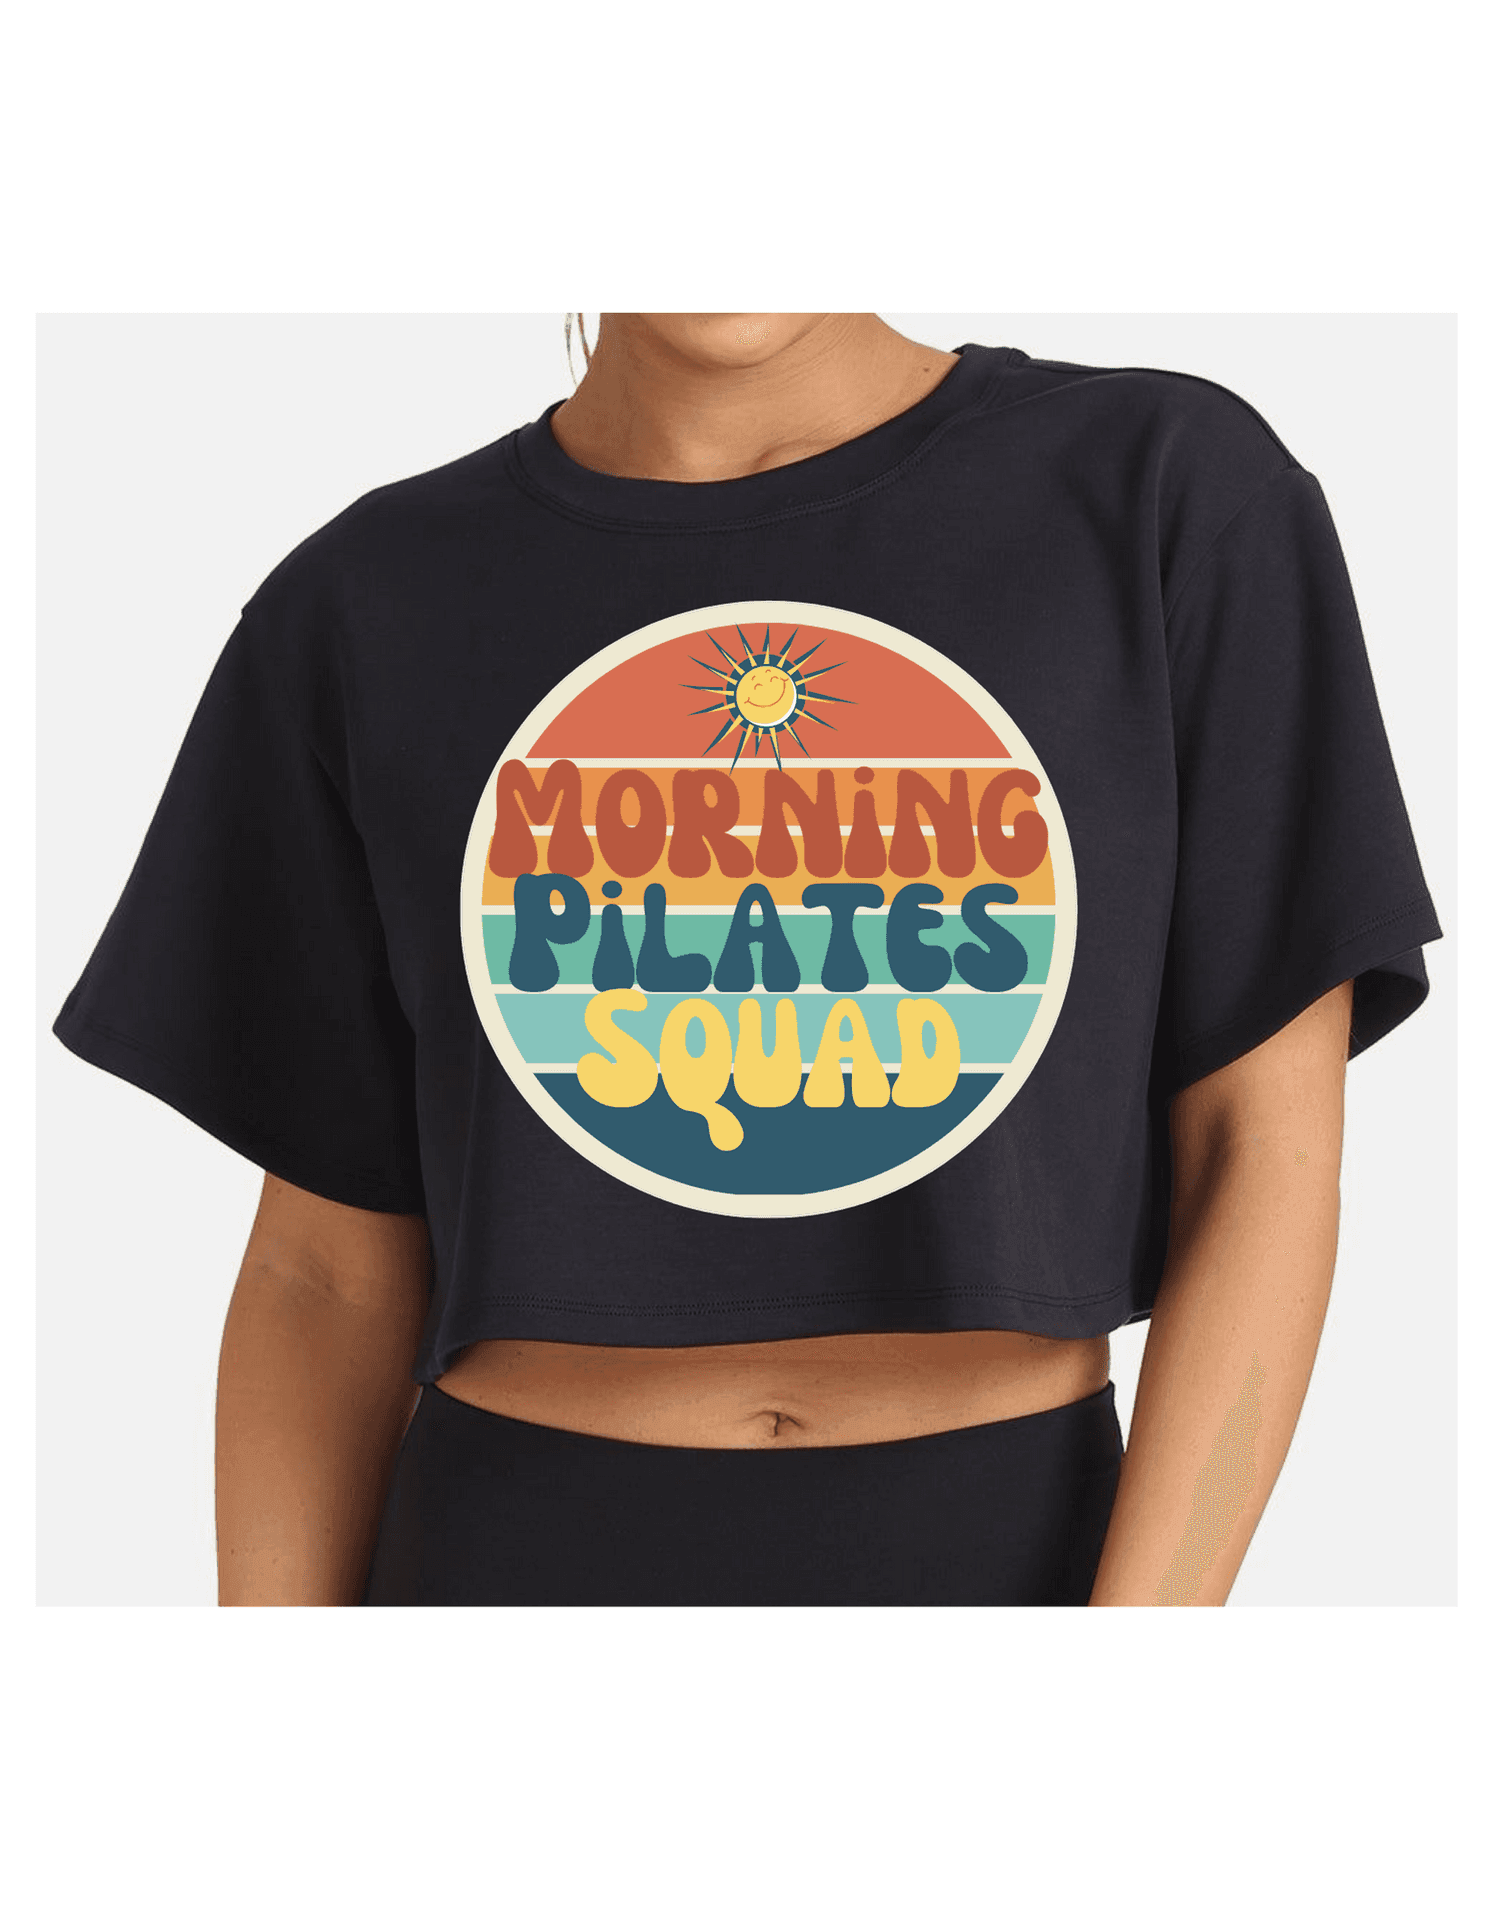 Morning Pilates squad cropped top with sleeve